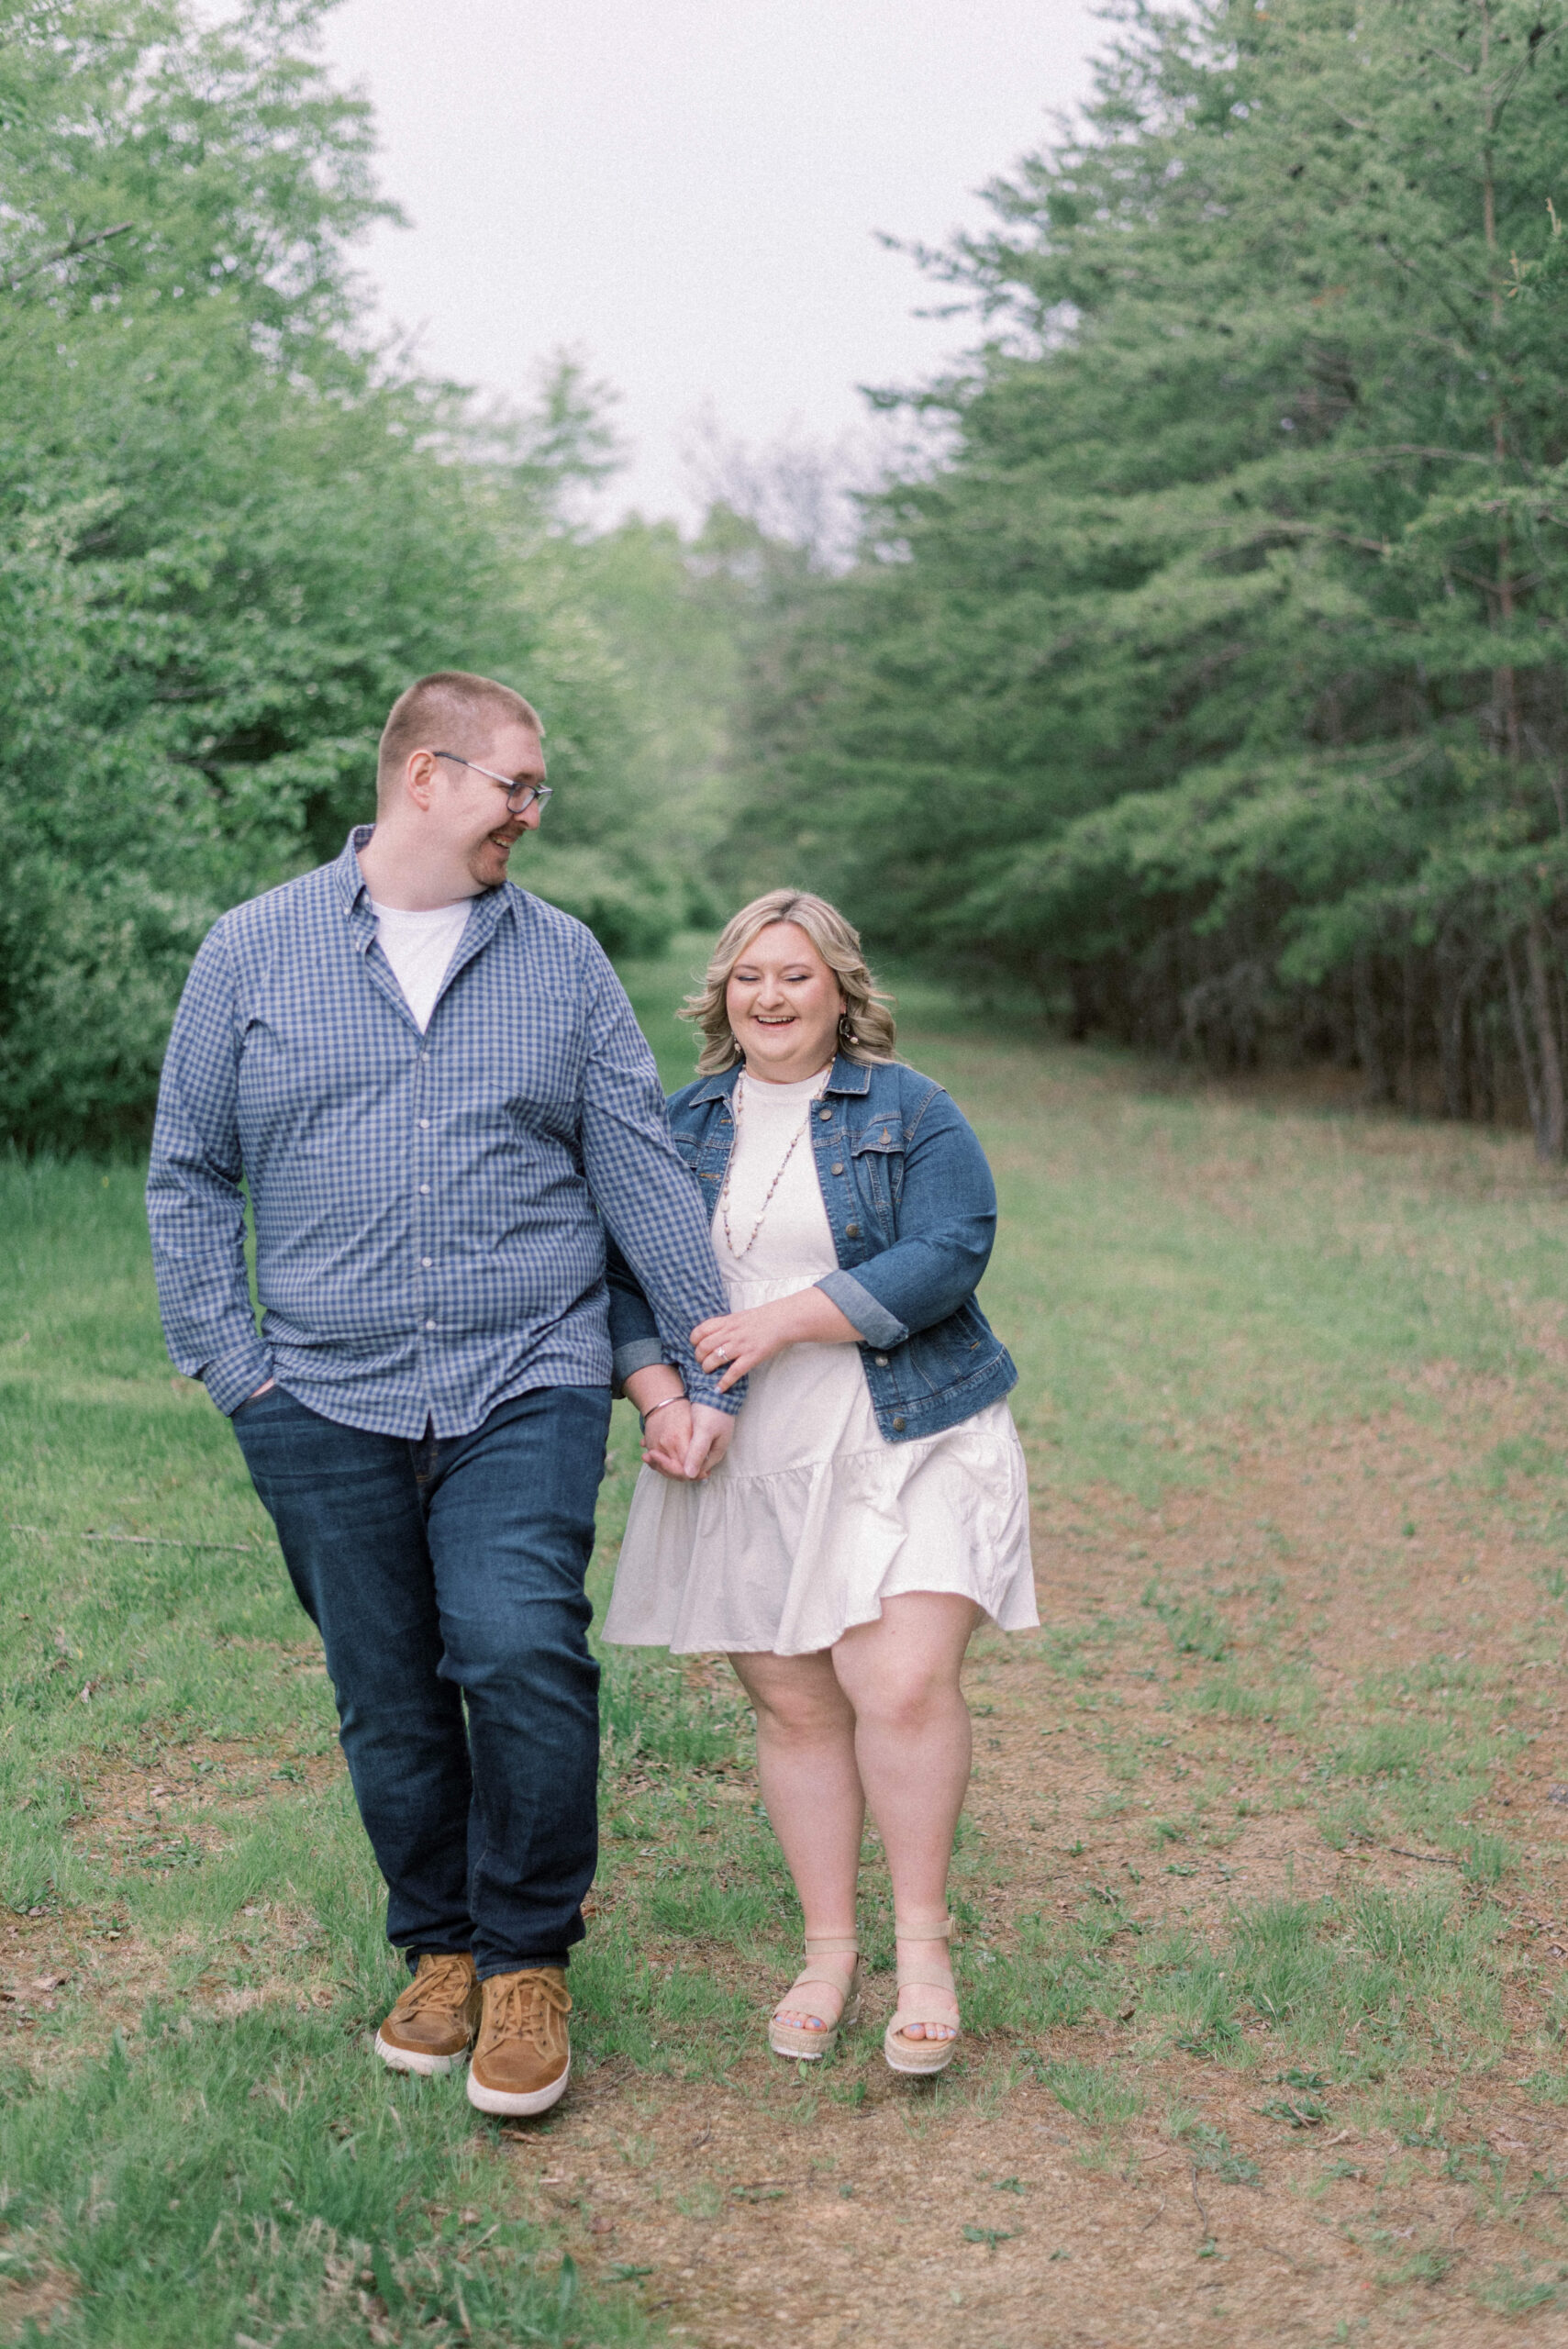 Pennsylvania wedding photographer captures couple laughing during portraits